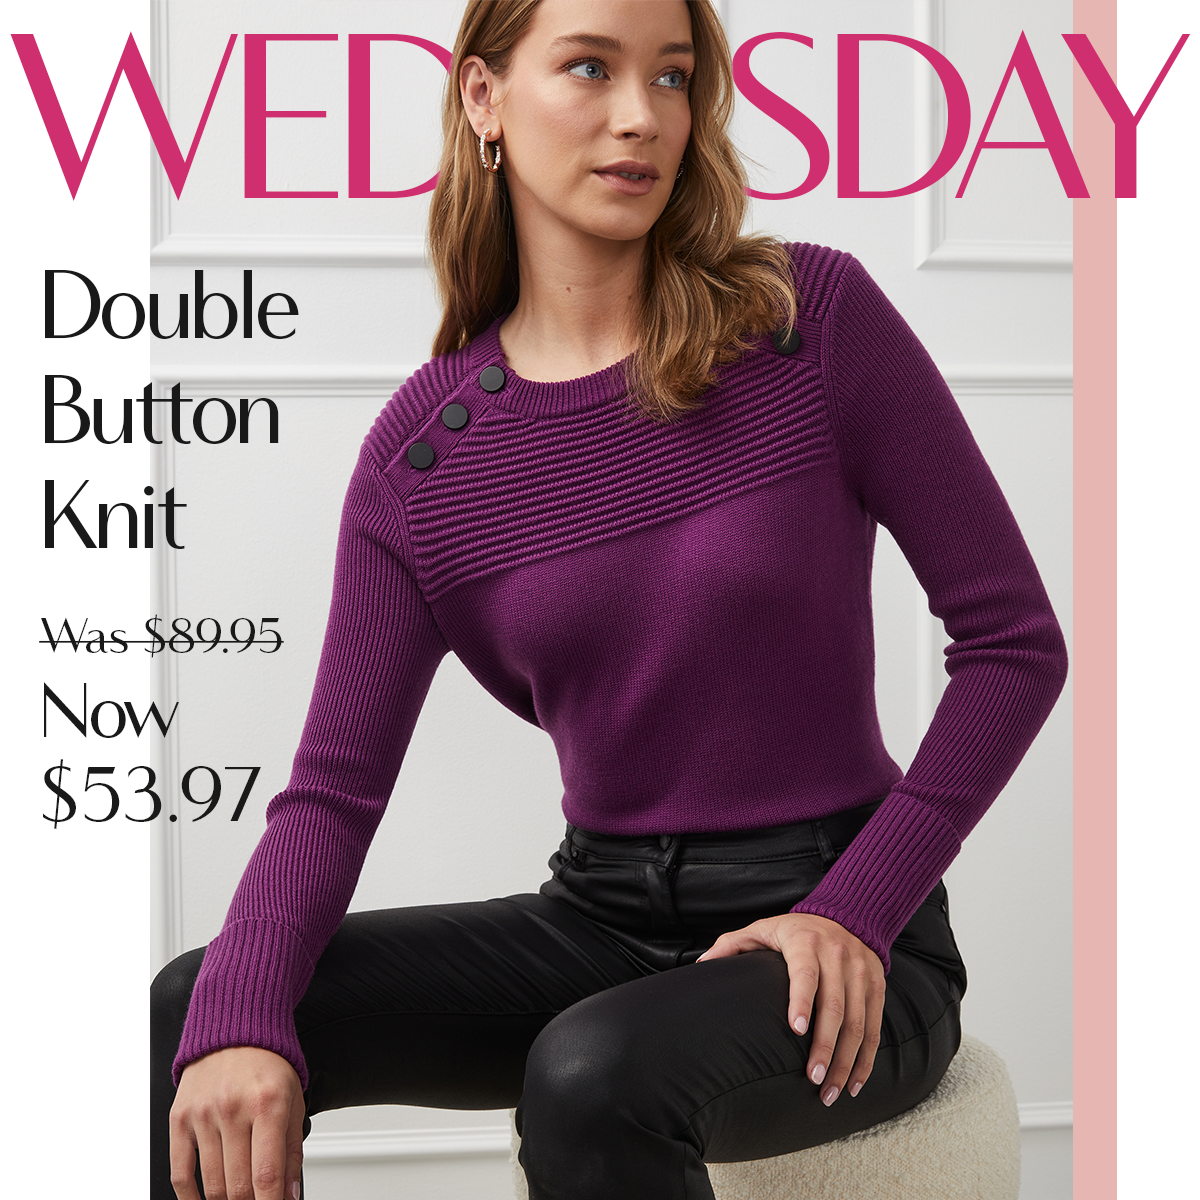 WEDNESDAY | Double Button Knit Was $89.95 Now $53.97